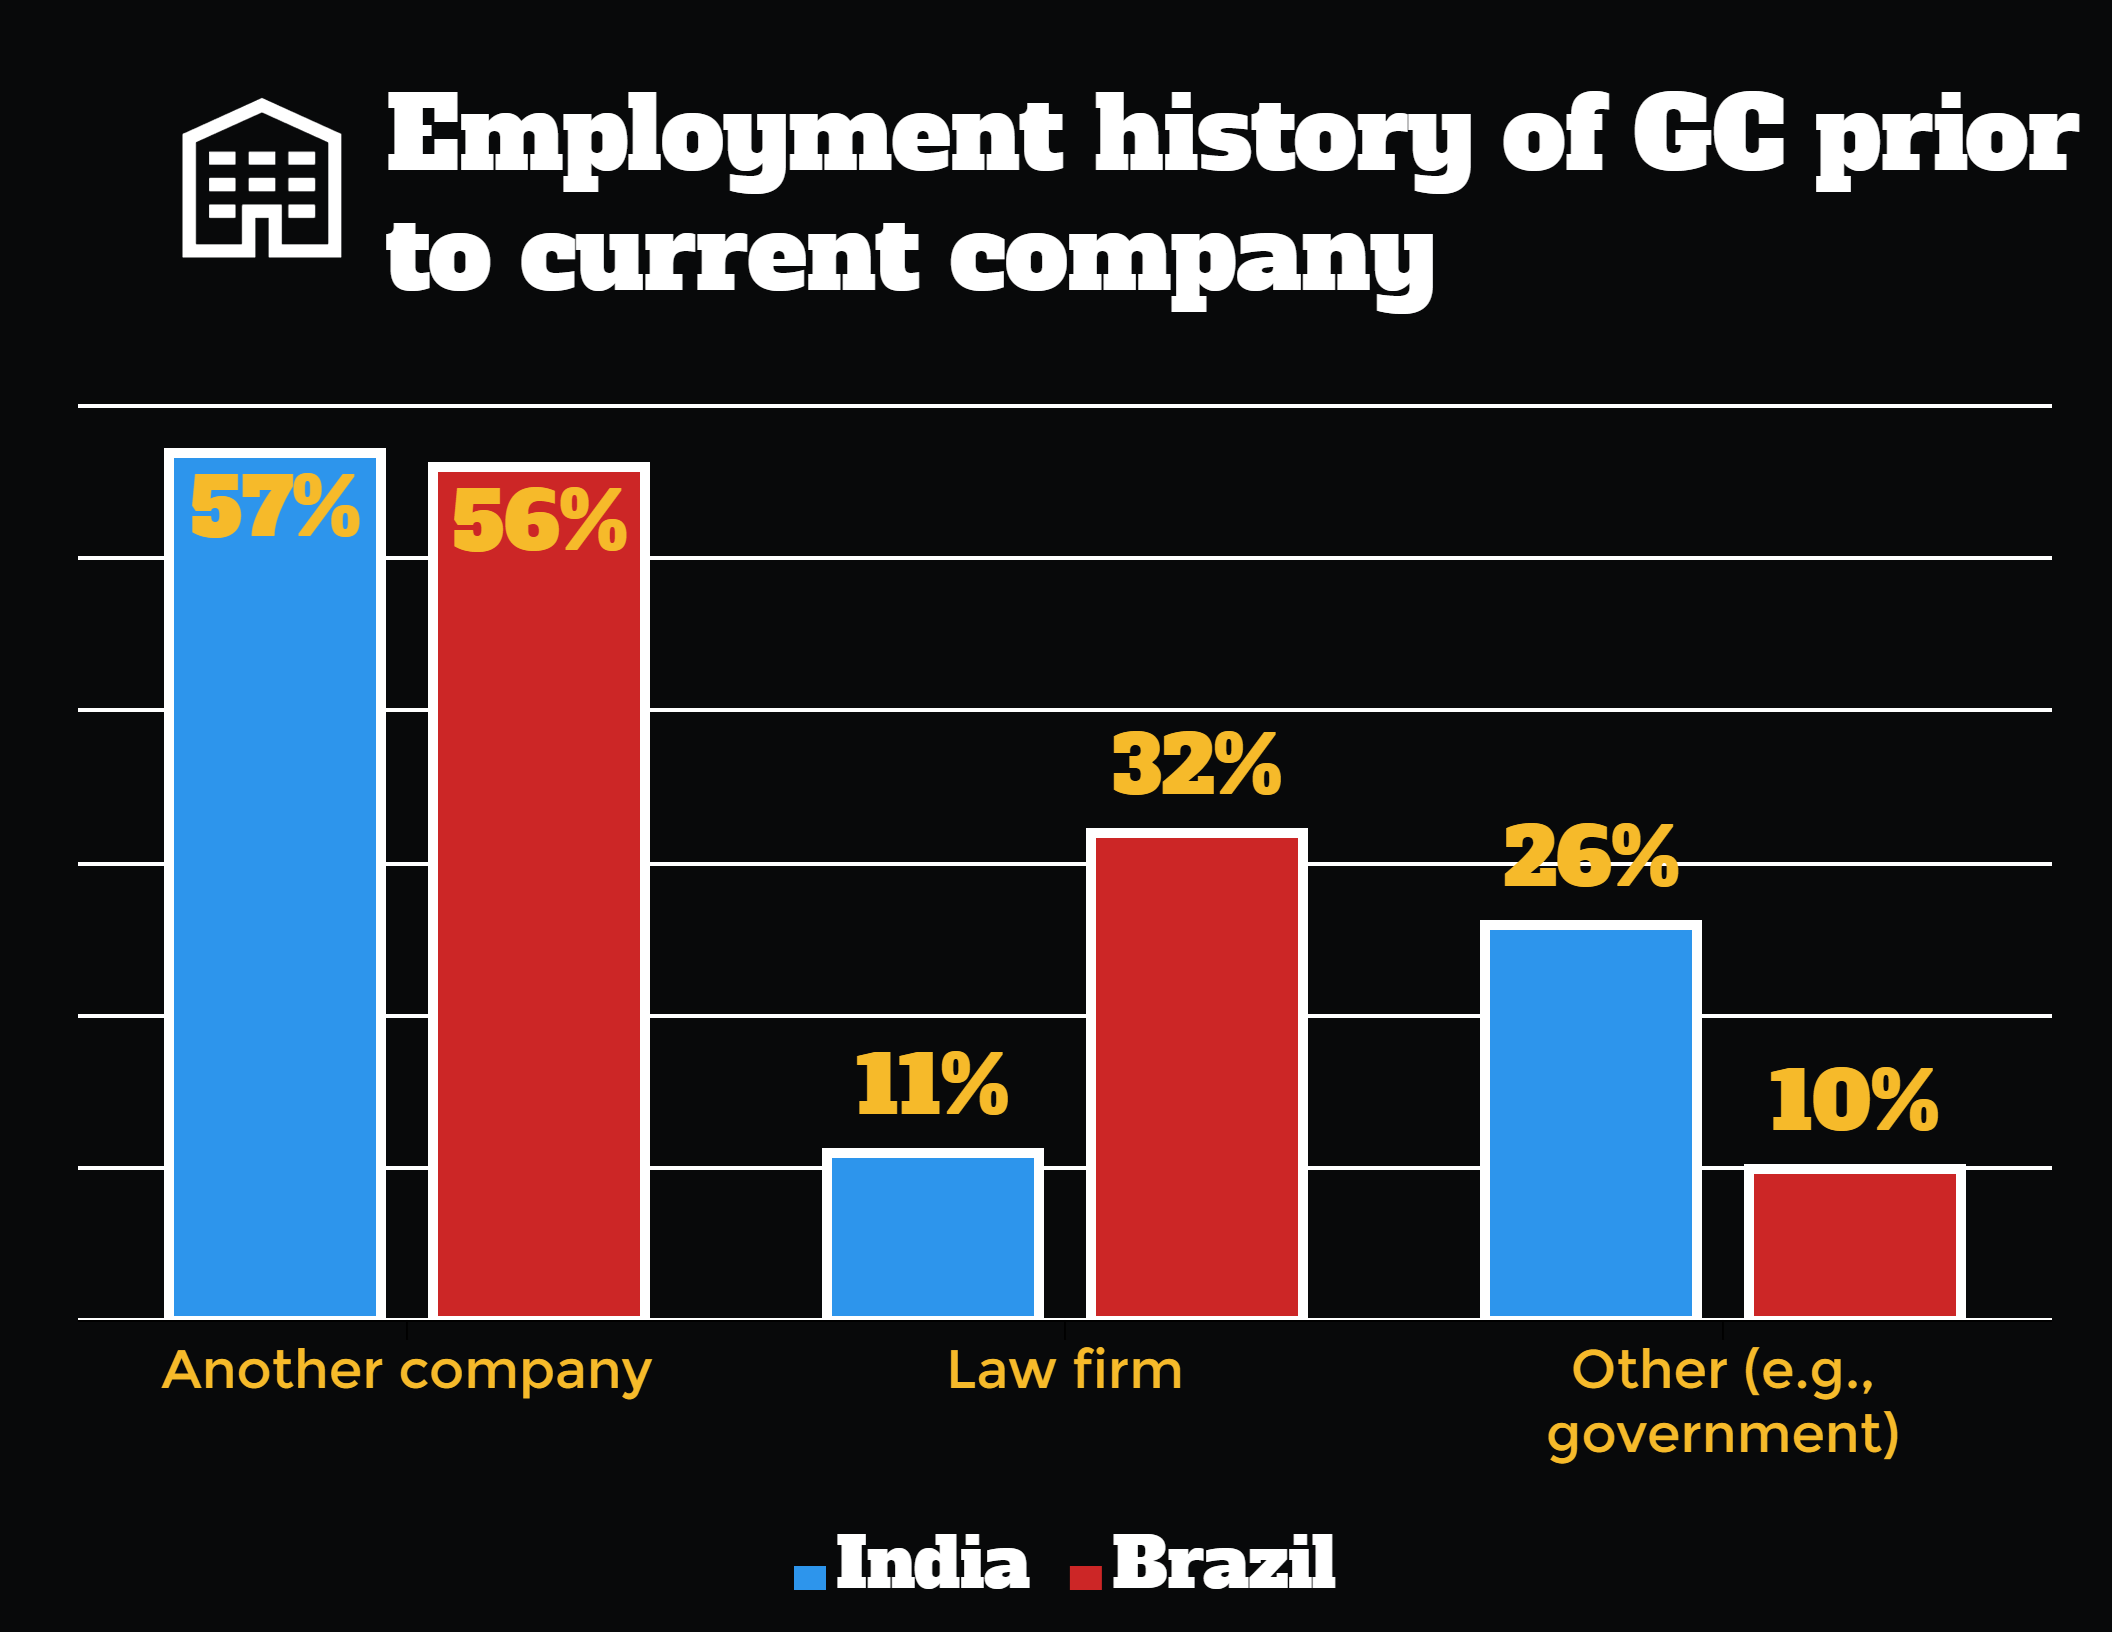 Employment history of general counsel in India and Brazil